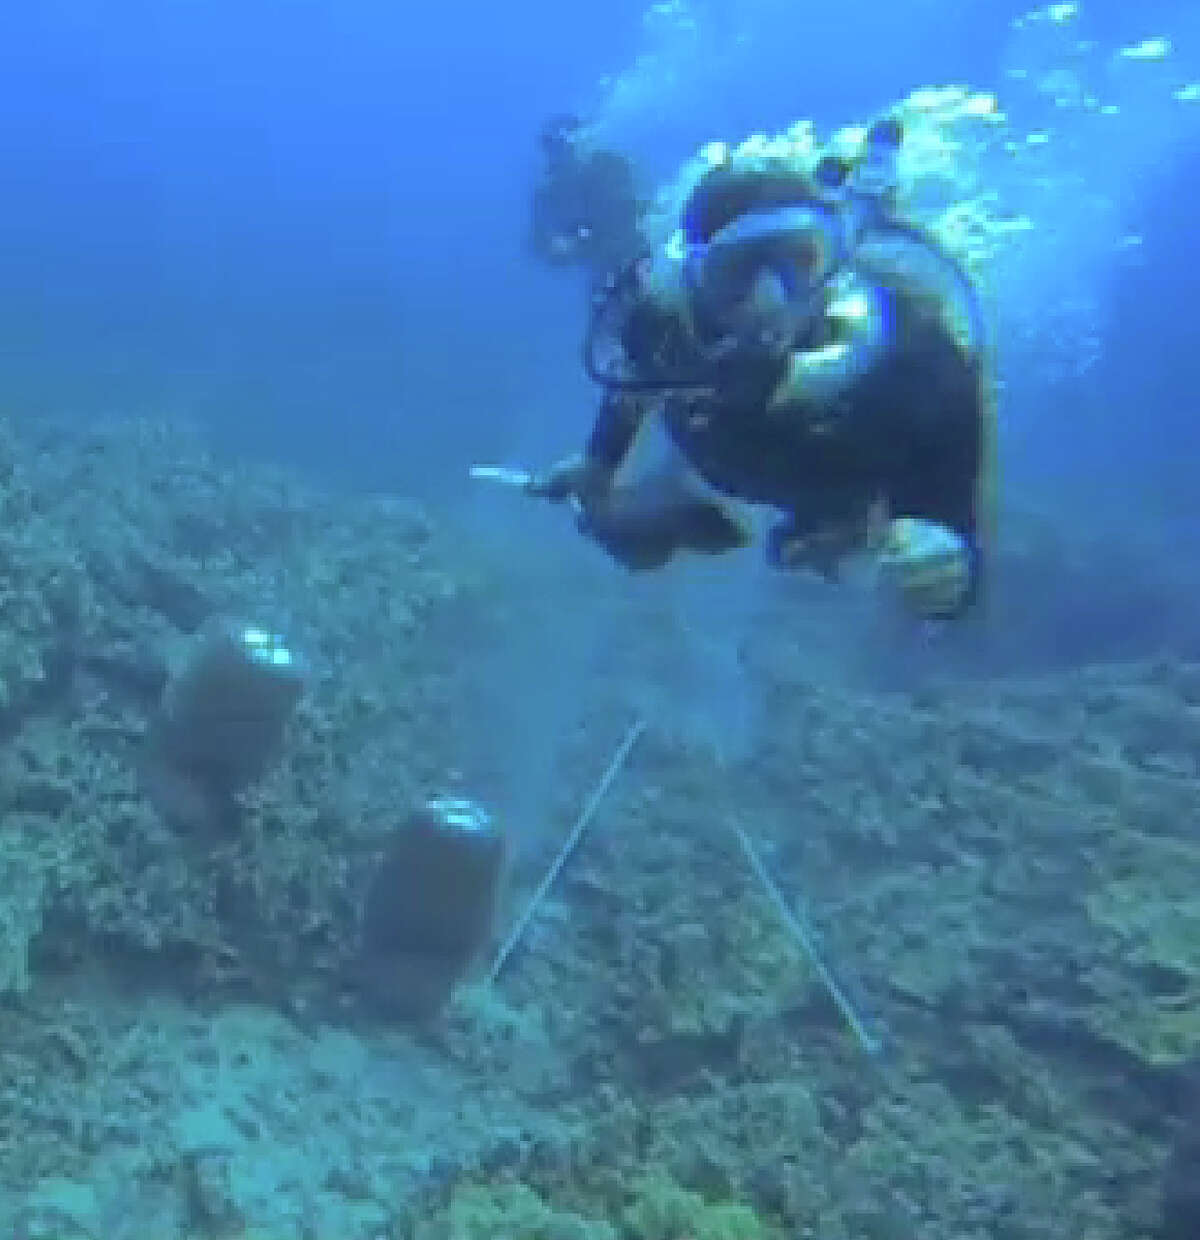 A scuba diver swims toward activist Rene Umberger moments before ripping her air supply regulator out of her mouth in this still frame made near Kona, Hawaii, from a video released by Umberger.